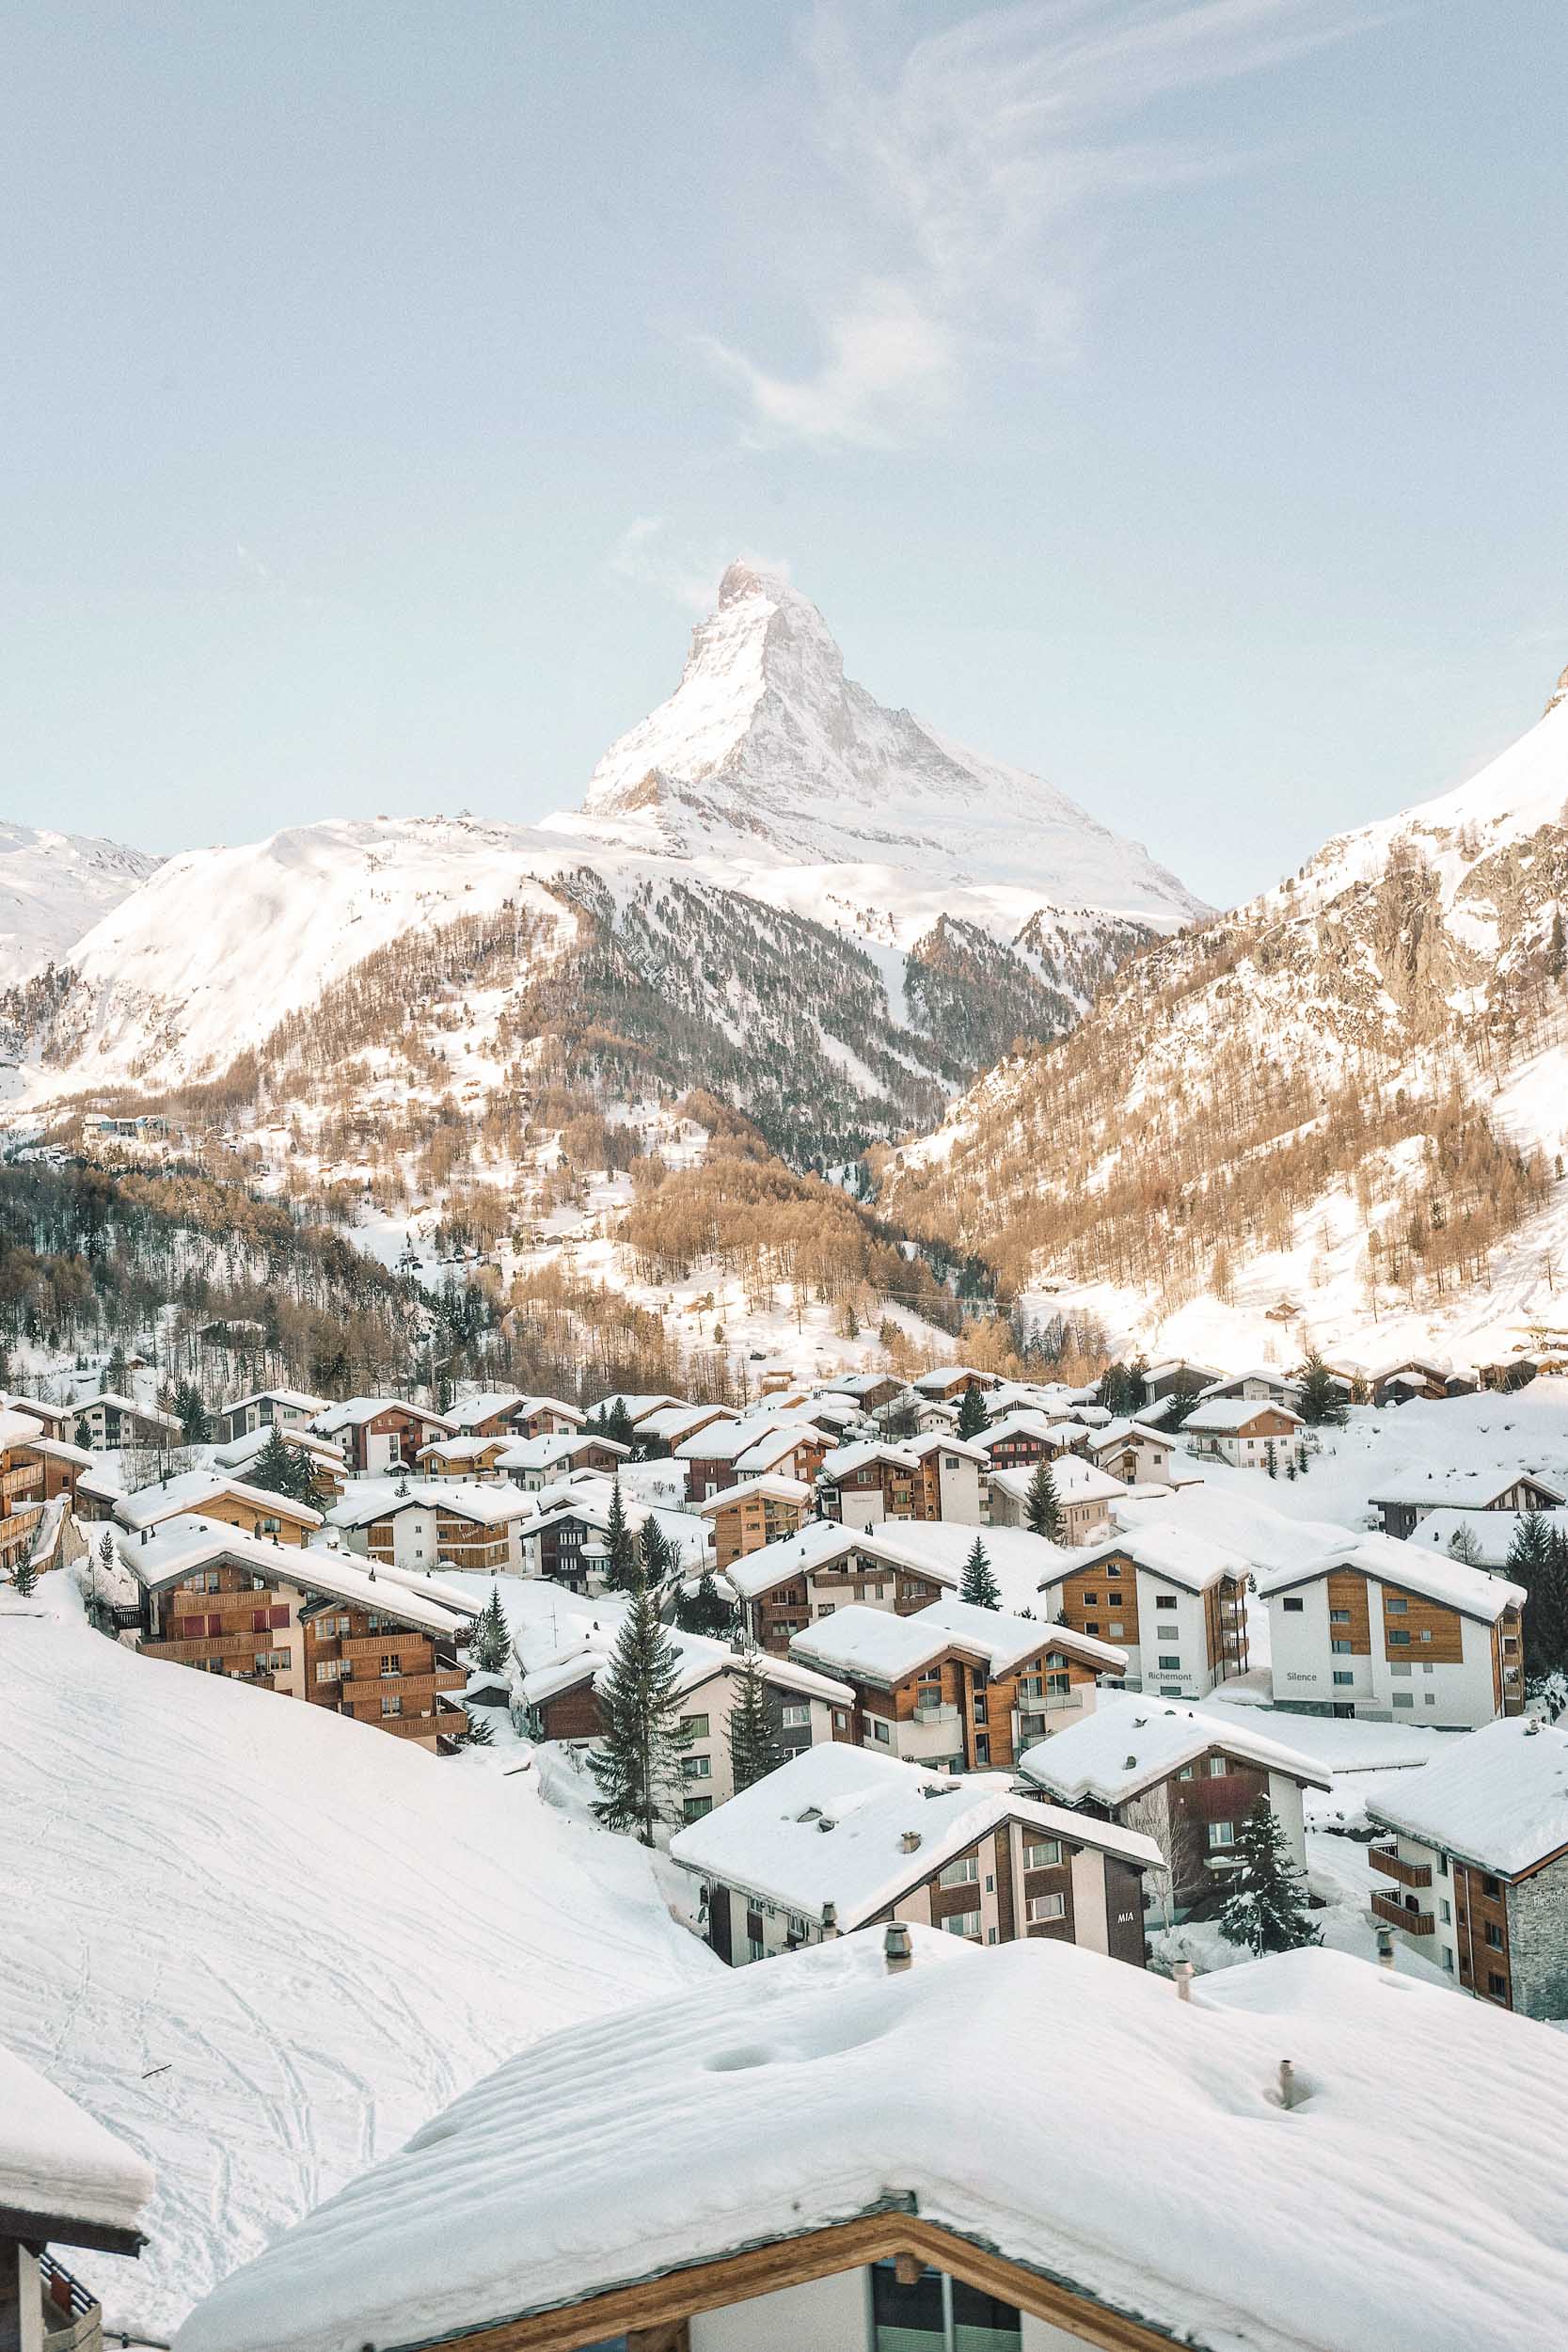 The entire village of Zermatt is car free, making it great for walking around and shopping at the many boutiques.